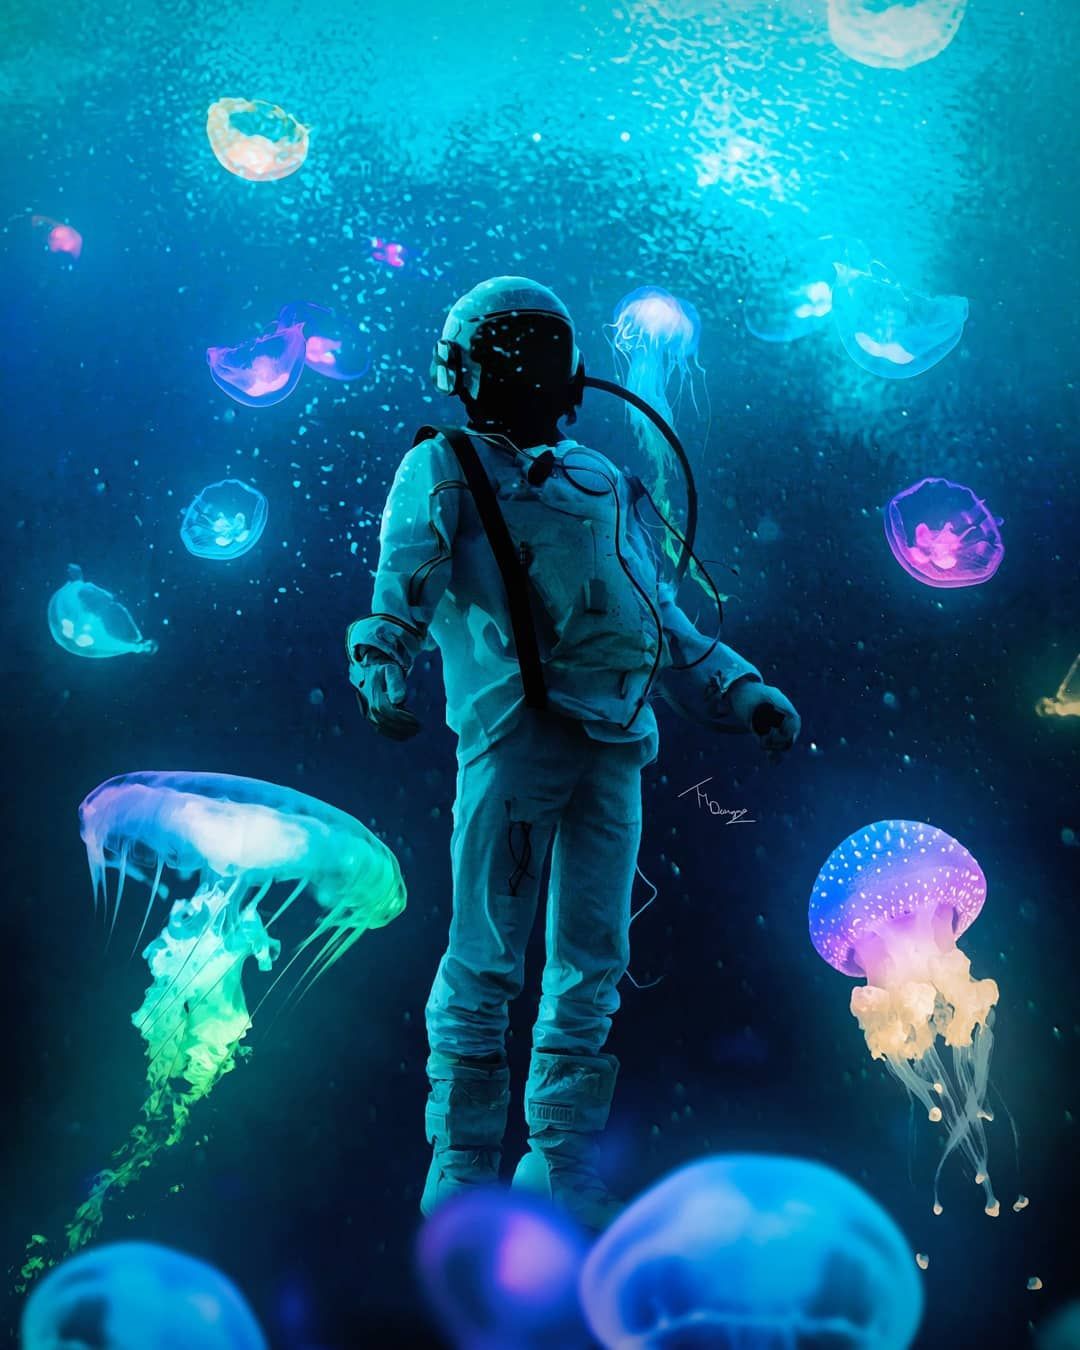 Astronaut Jellyfish Wallpapers - Wallpaper Cave